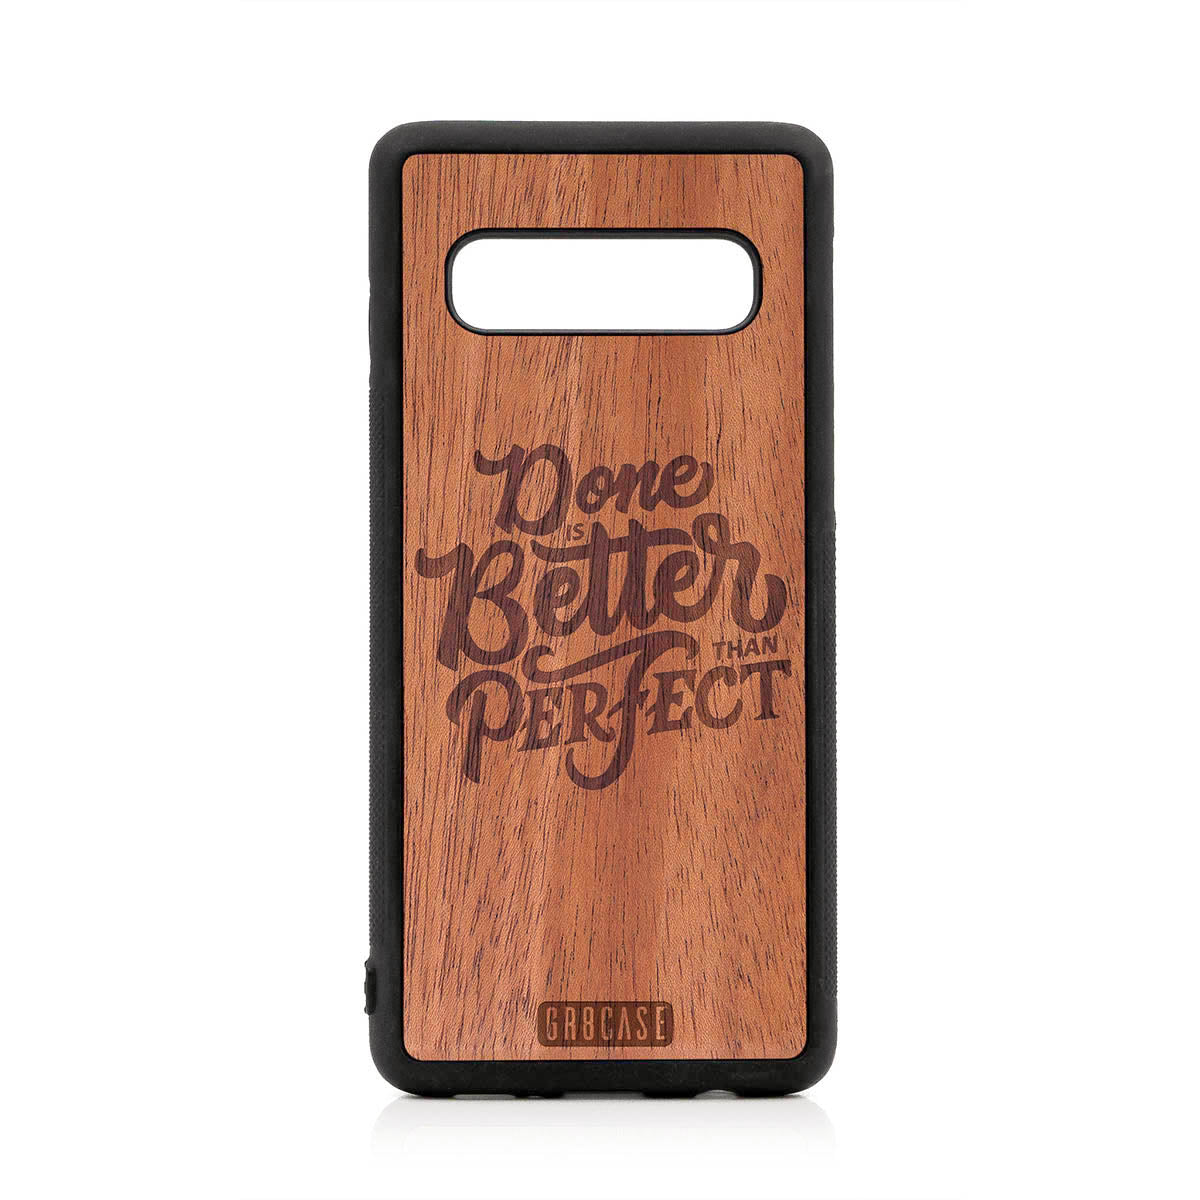 Done Is Better Than Perfect Design Wood Case For Samsung Galaxy S10 by GR8CASE